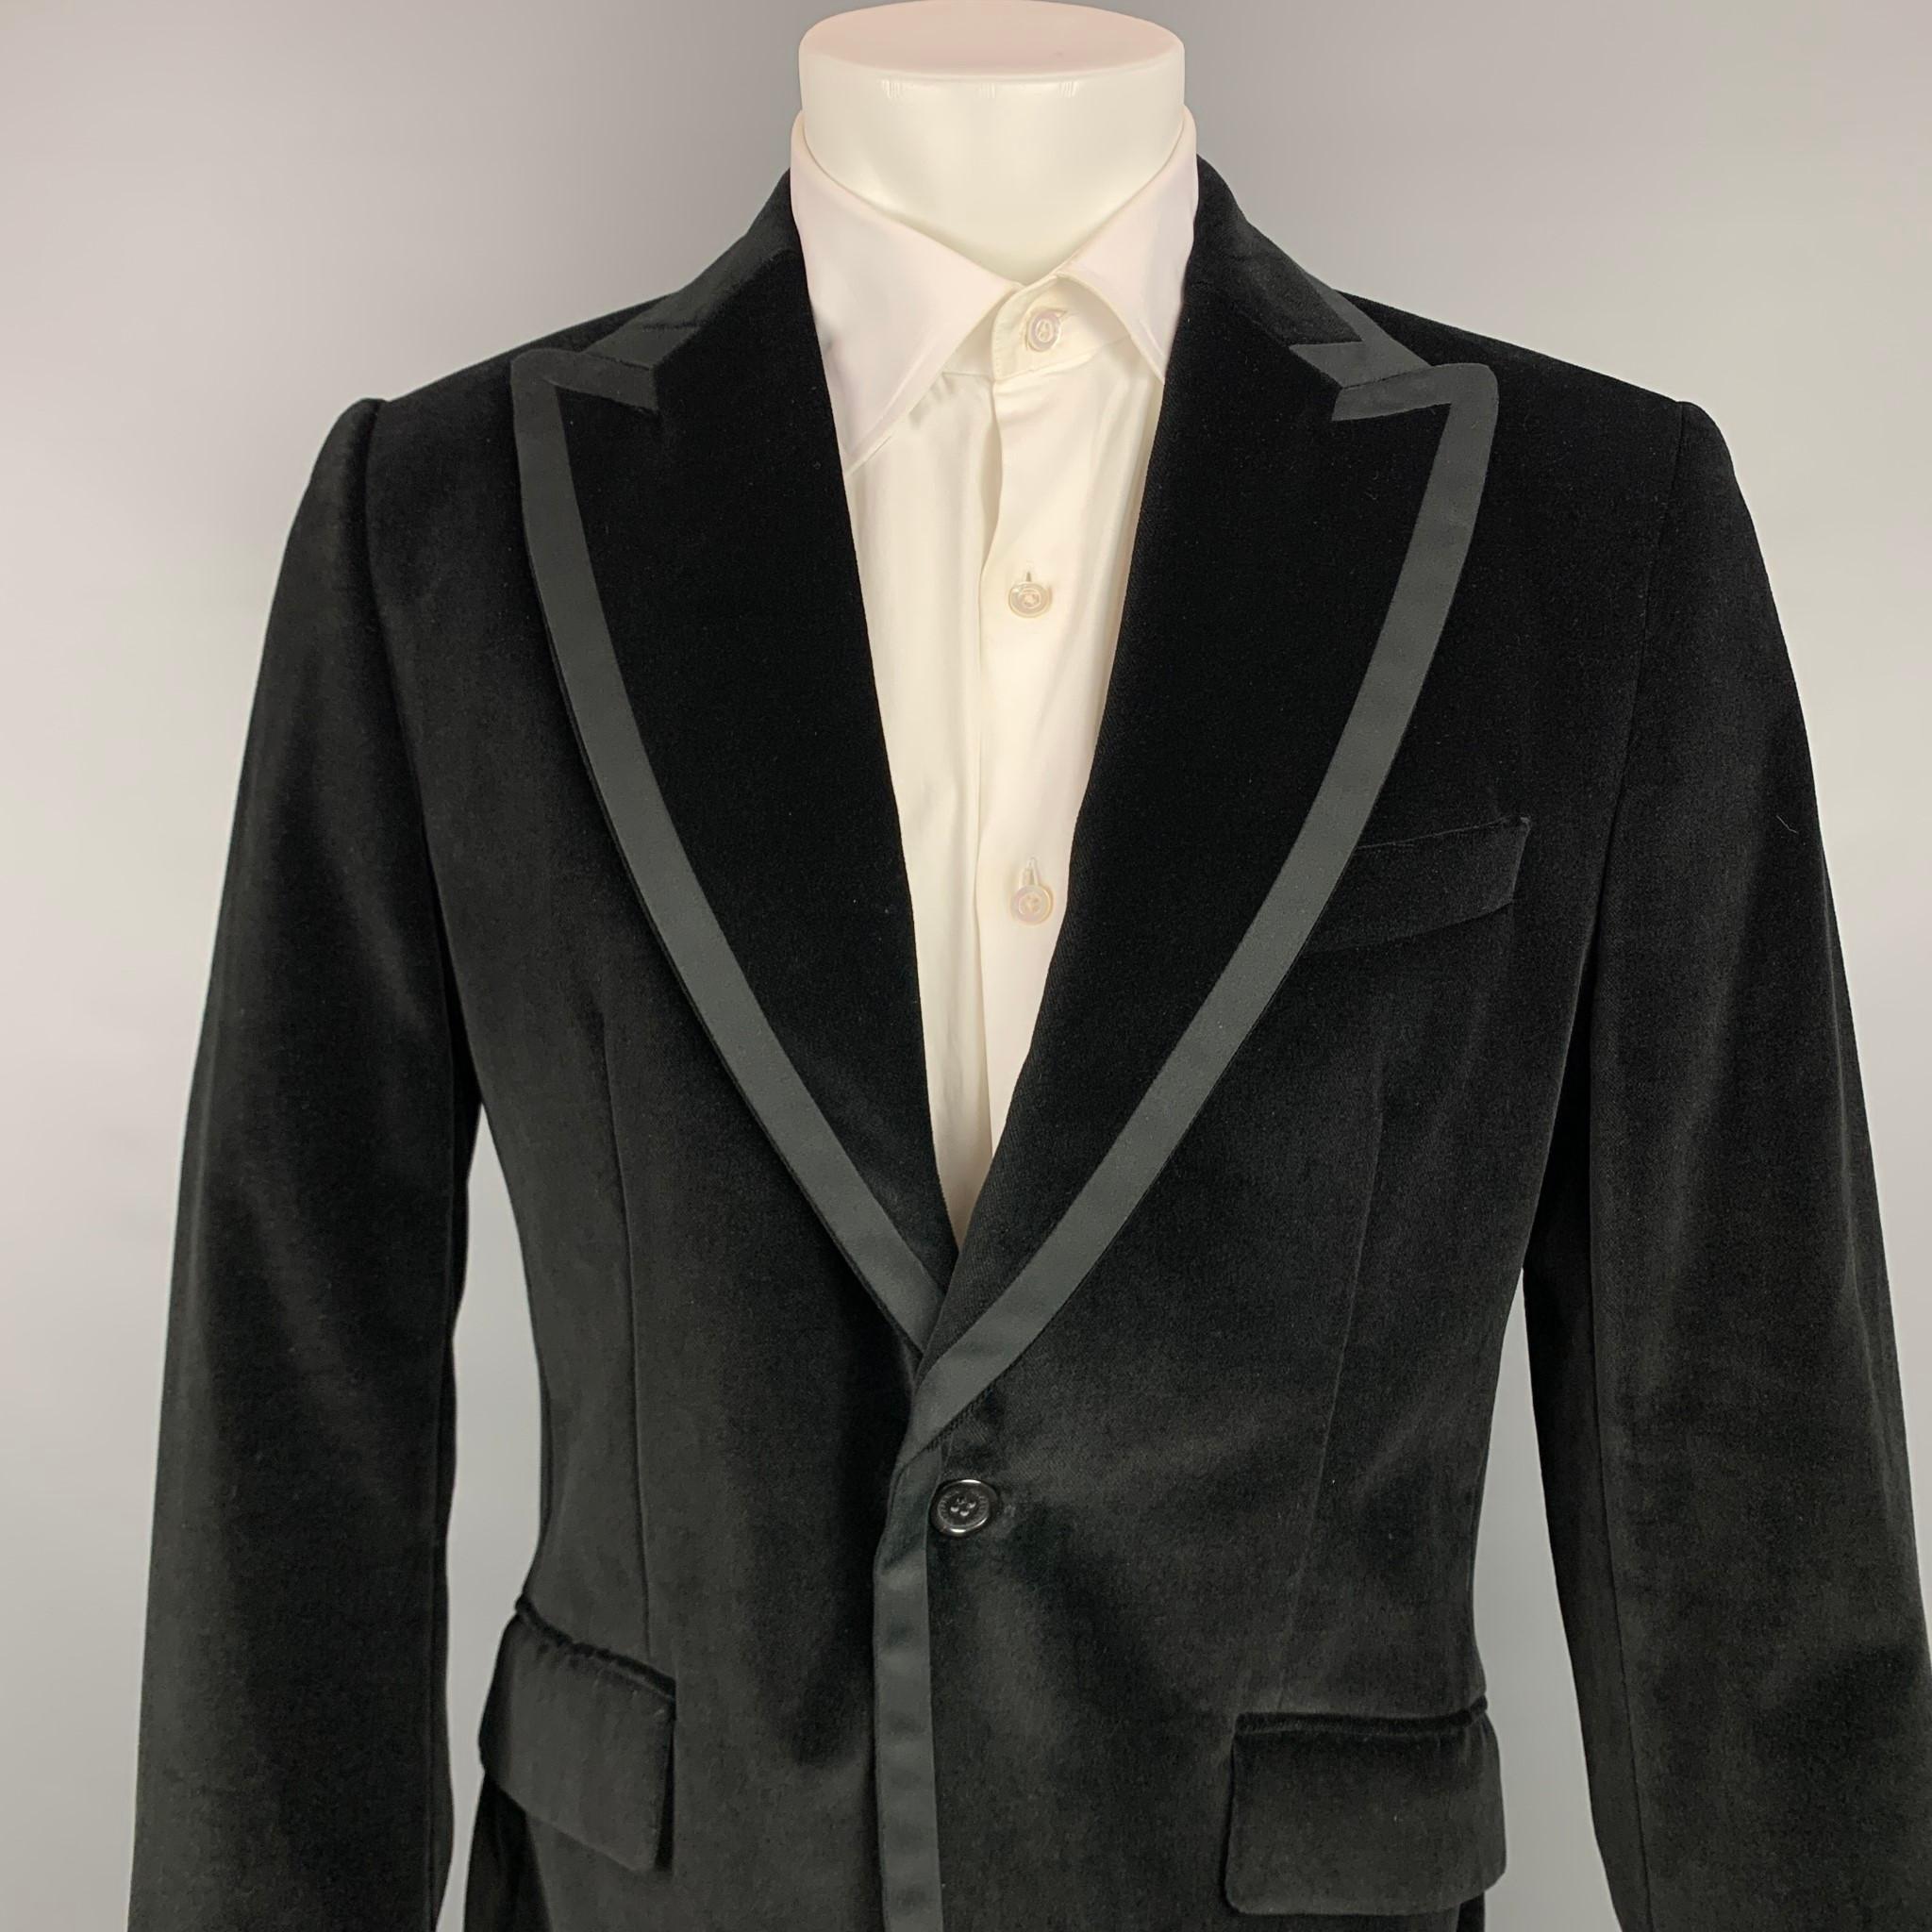 GAZZARRINI sport coat comes in a black velvet with a full liner featuring a peak lapel, flap pockets, and a single button closure. Made in Italy.

Very Good Pre-Owned Condition.
Marked: IT 52

Measurements:

Shoulder: 17 in.
Chest: 42 in.
Sleeve: 25